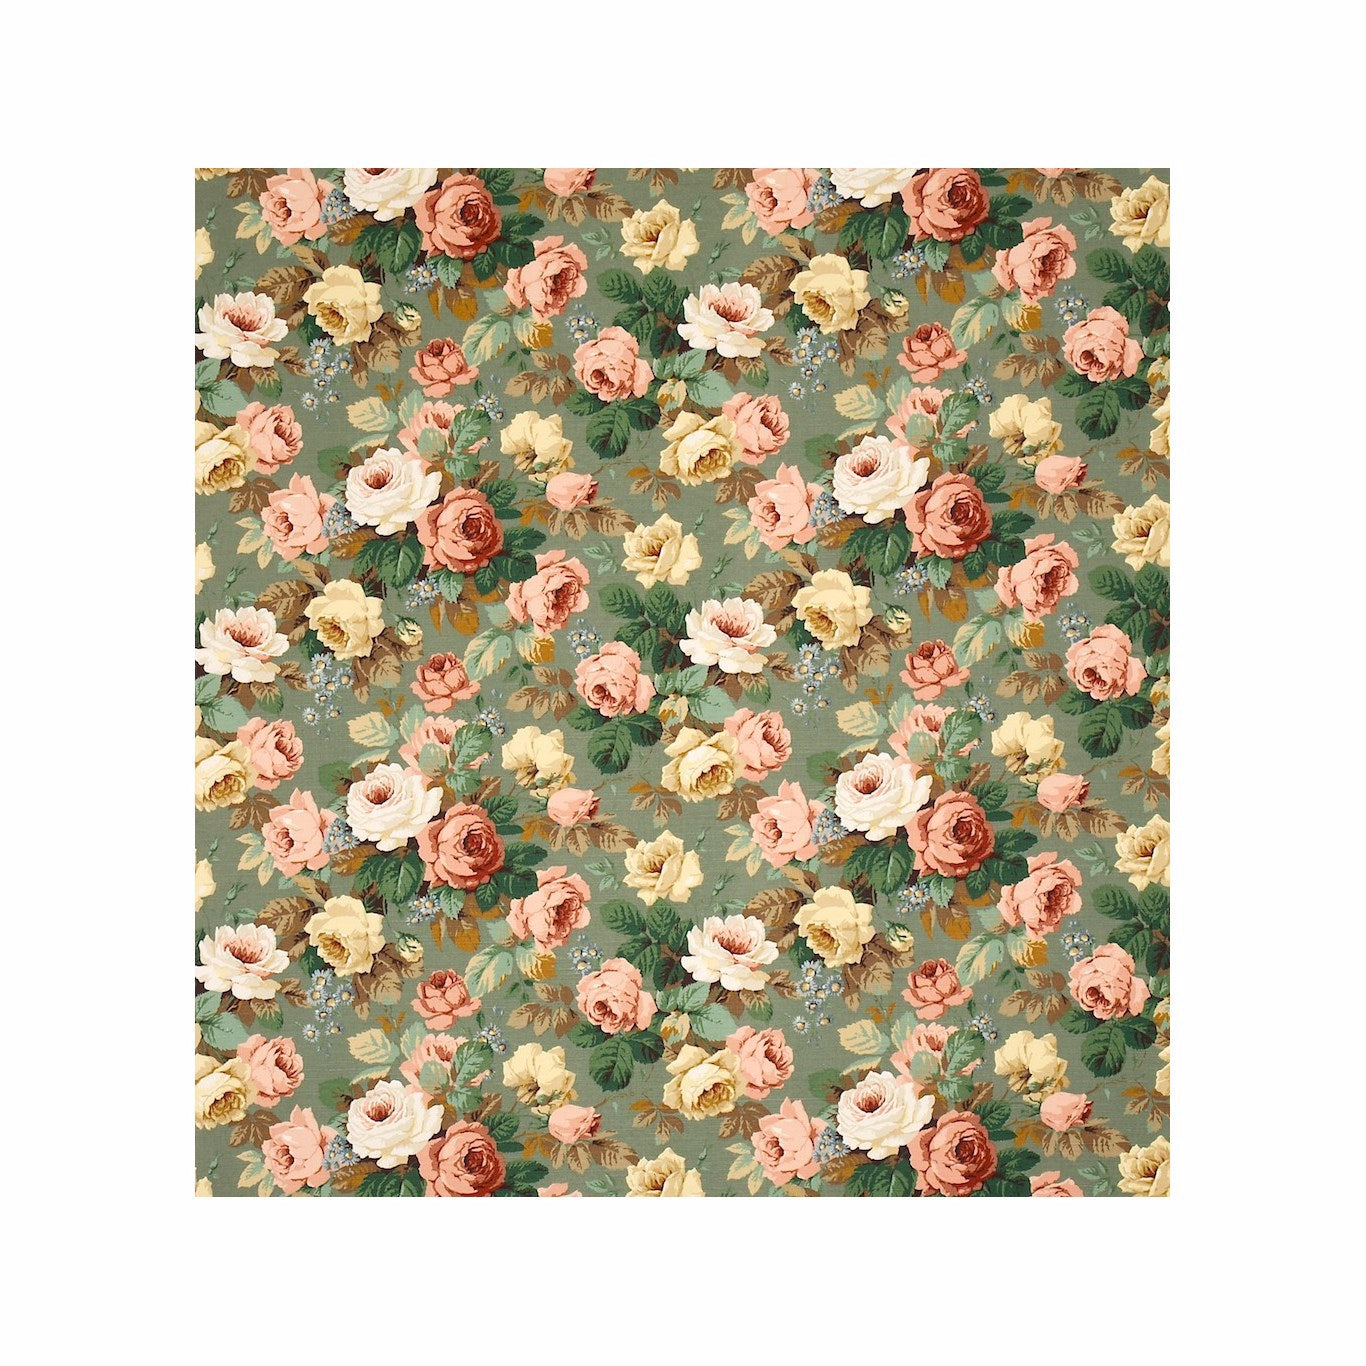 Chelsea Fabric by Sanderson - DKH1C2203 - Green/Coral